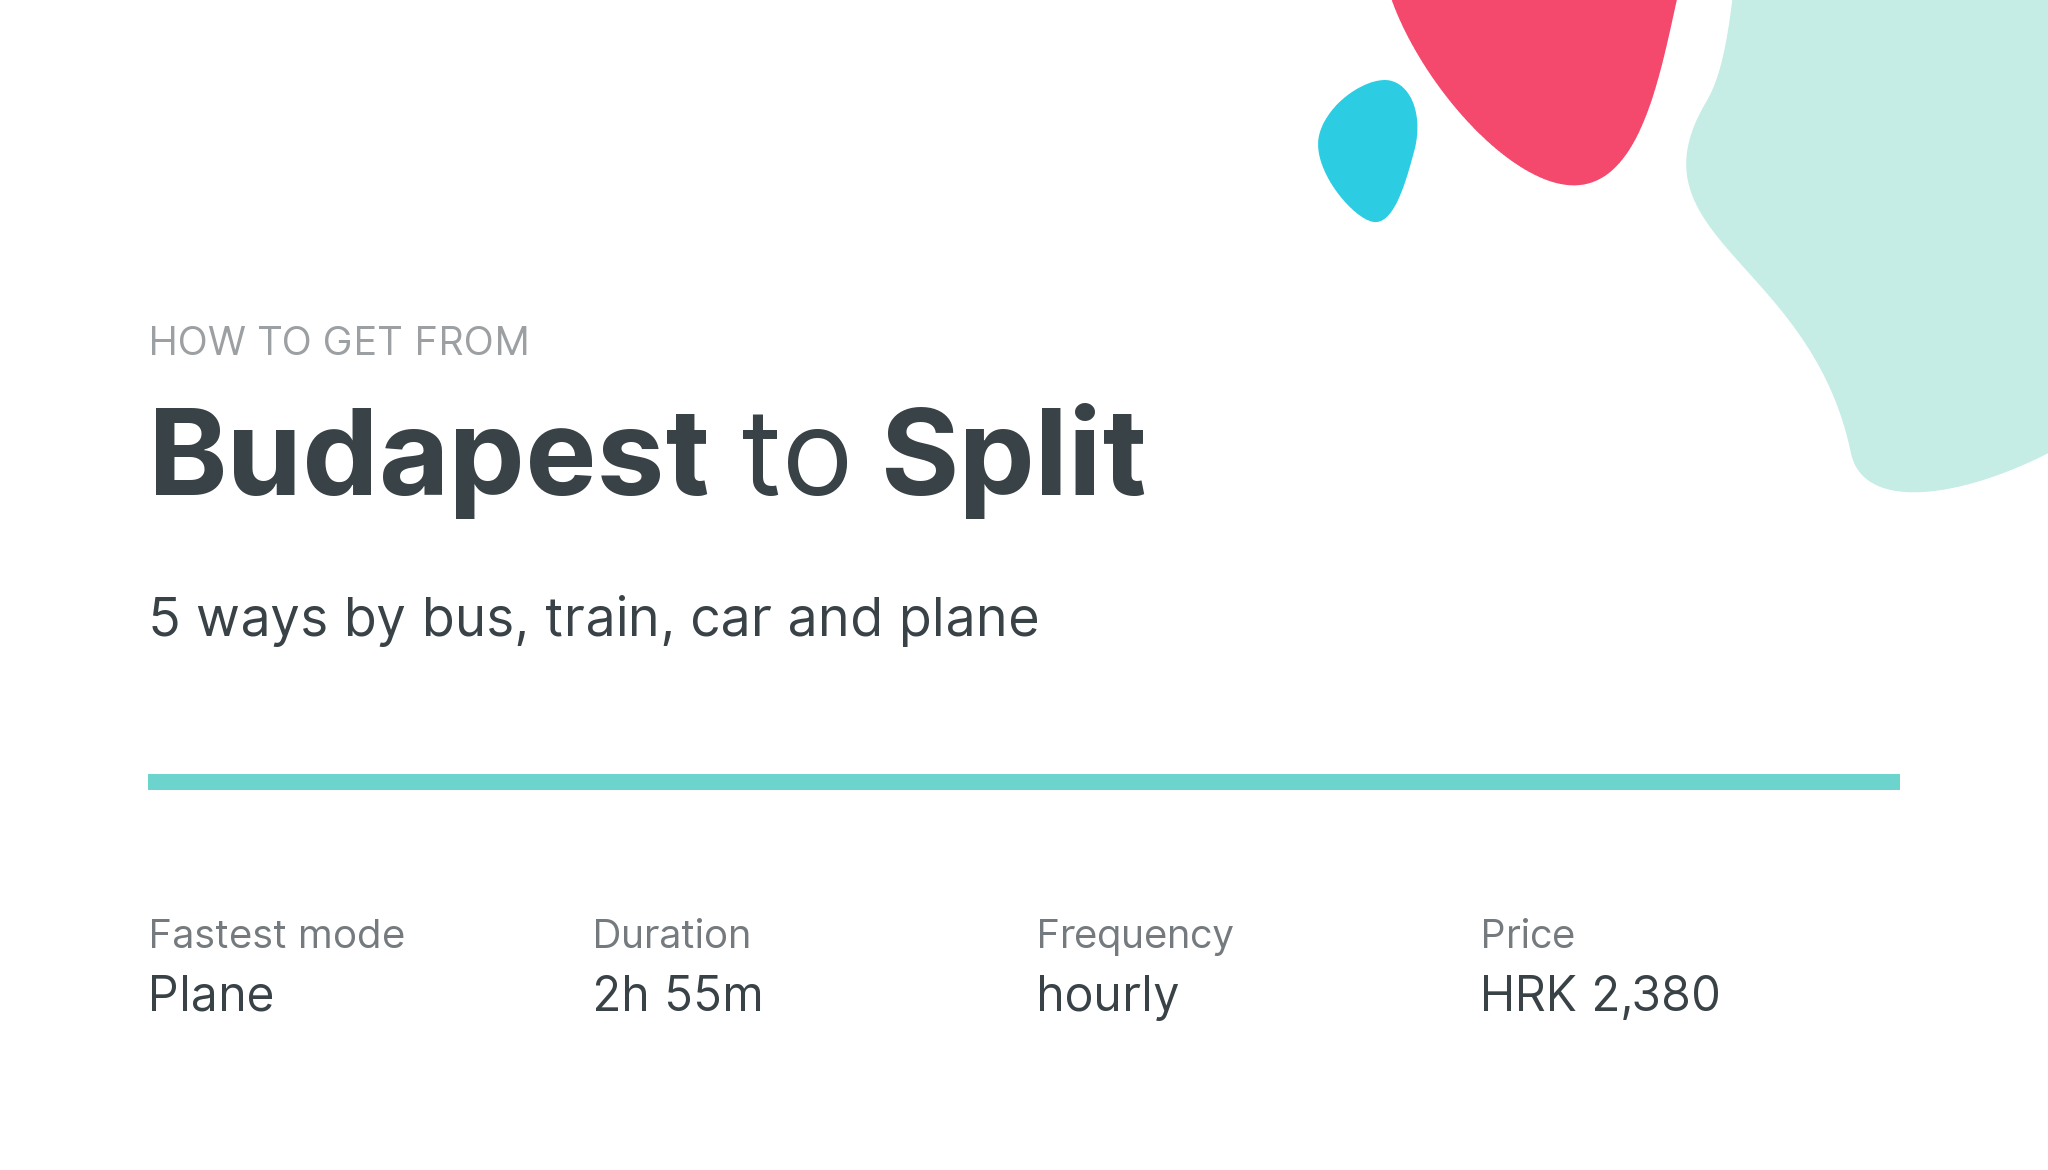 How do I get from Budapest to Split